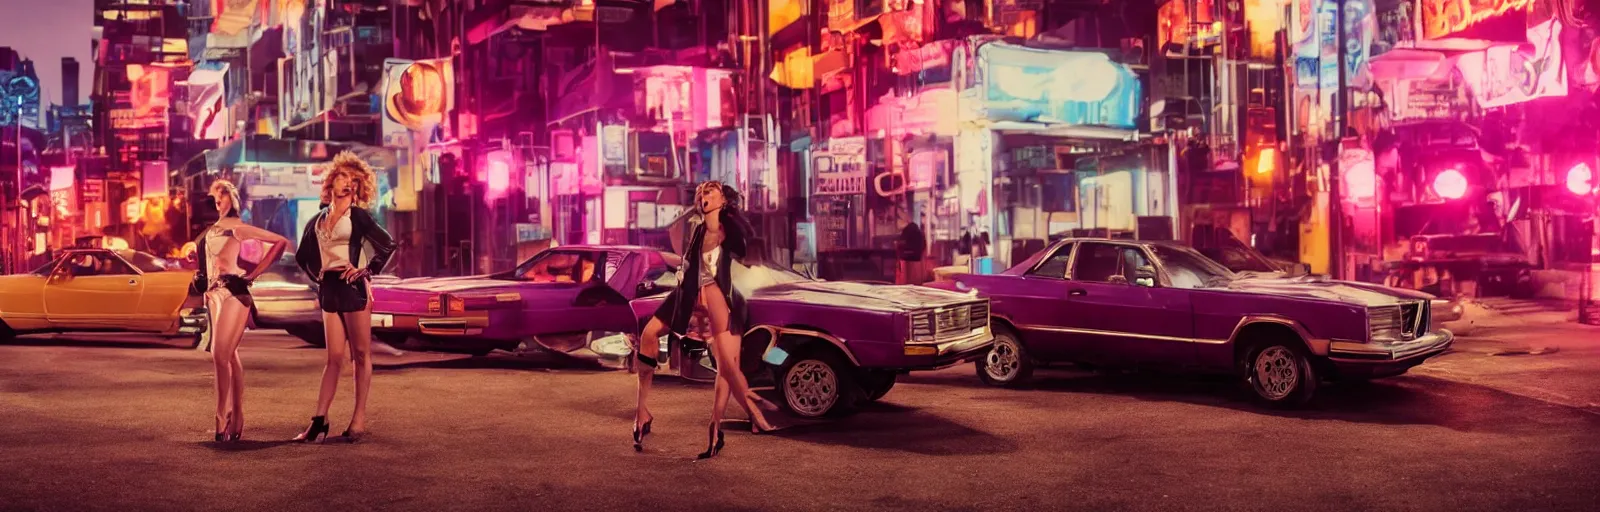 Image similar to 80s dressed Scarlett Johansson posing and in the background there two 80s sports cars parked on a deserted city street at night time, purple lighted street, wide angle, cinematic, retro-wave vibes, grainy, soft motion blur